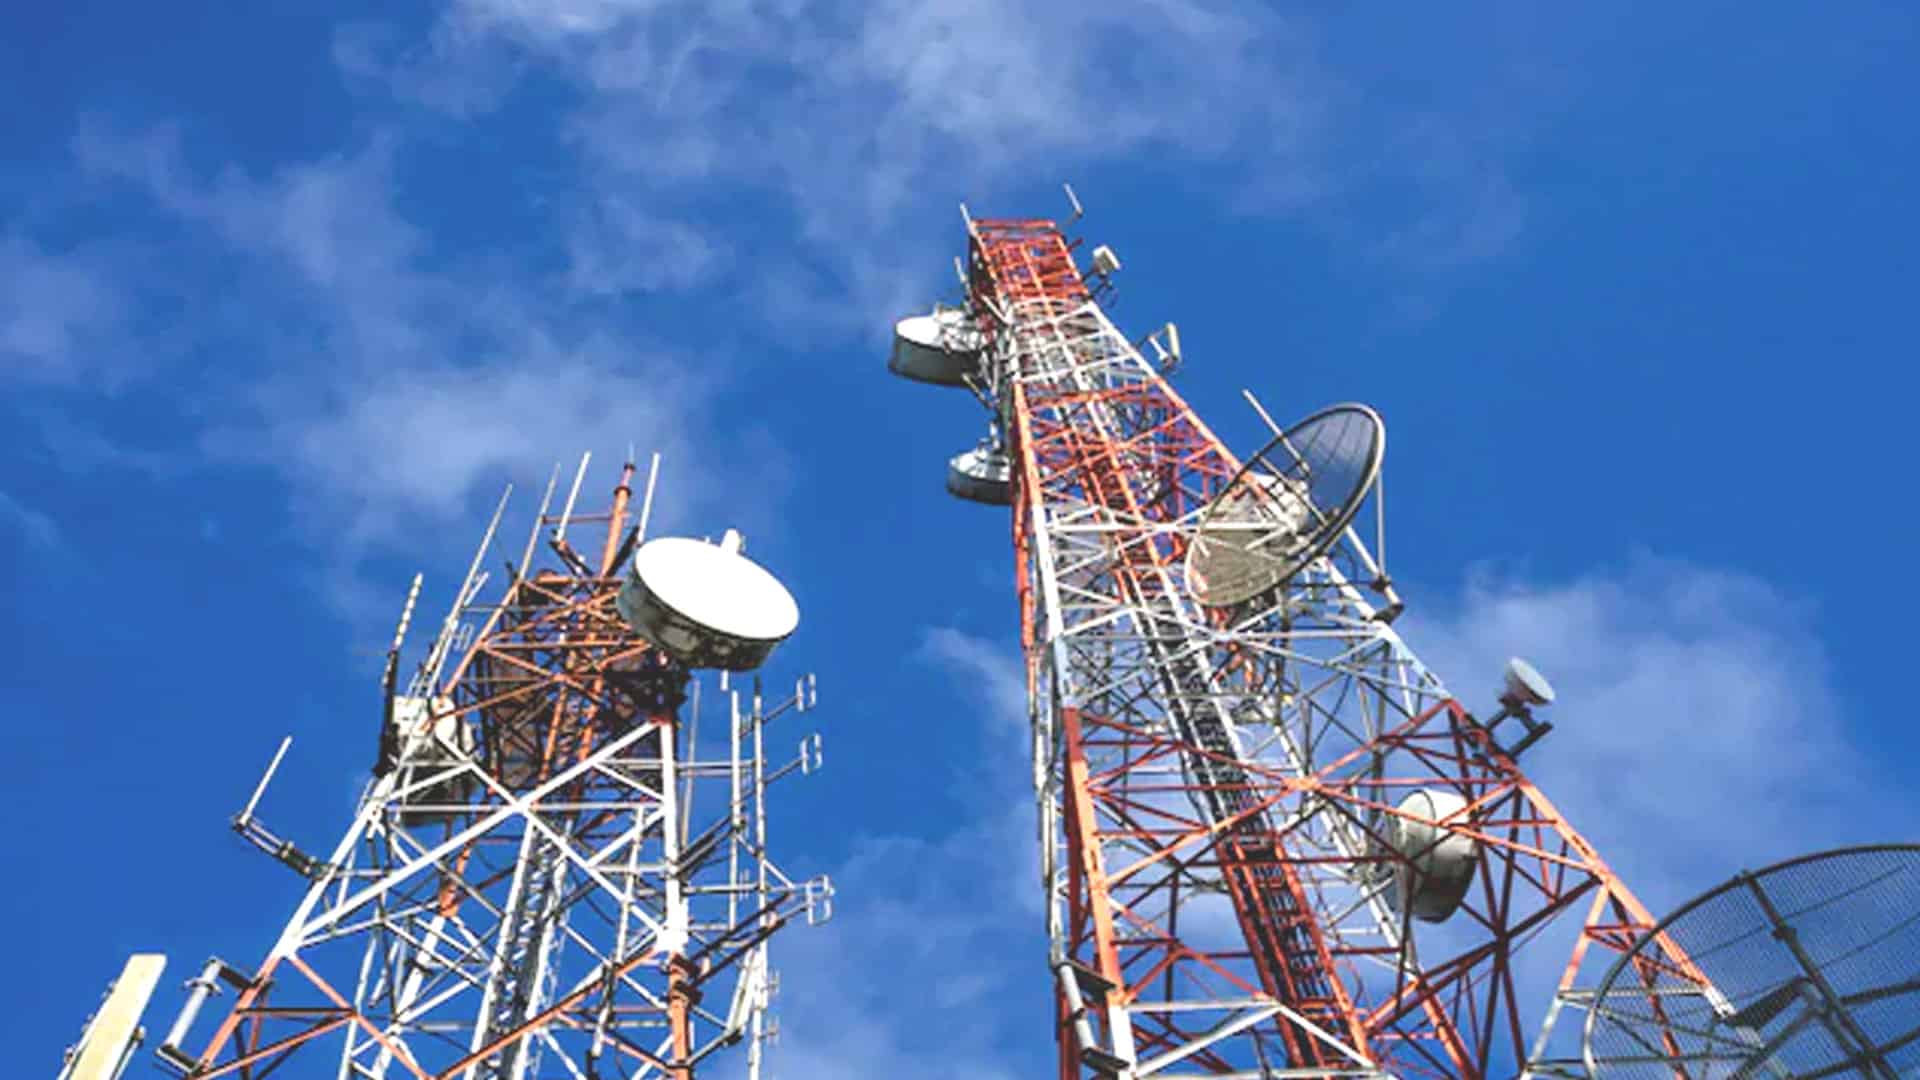 Spectrum bands for 5G to be announced soon: DoT official